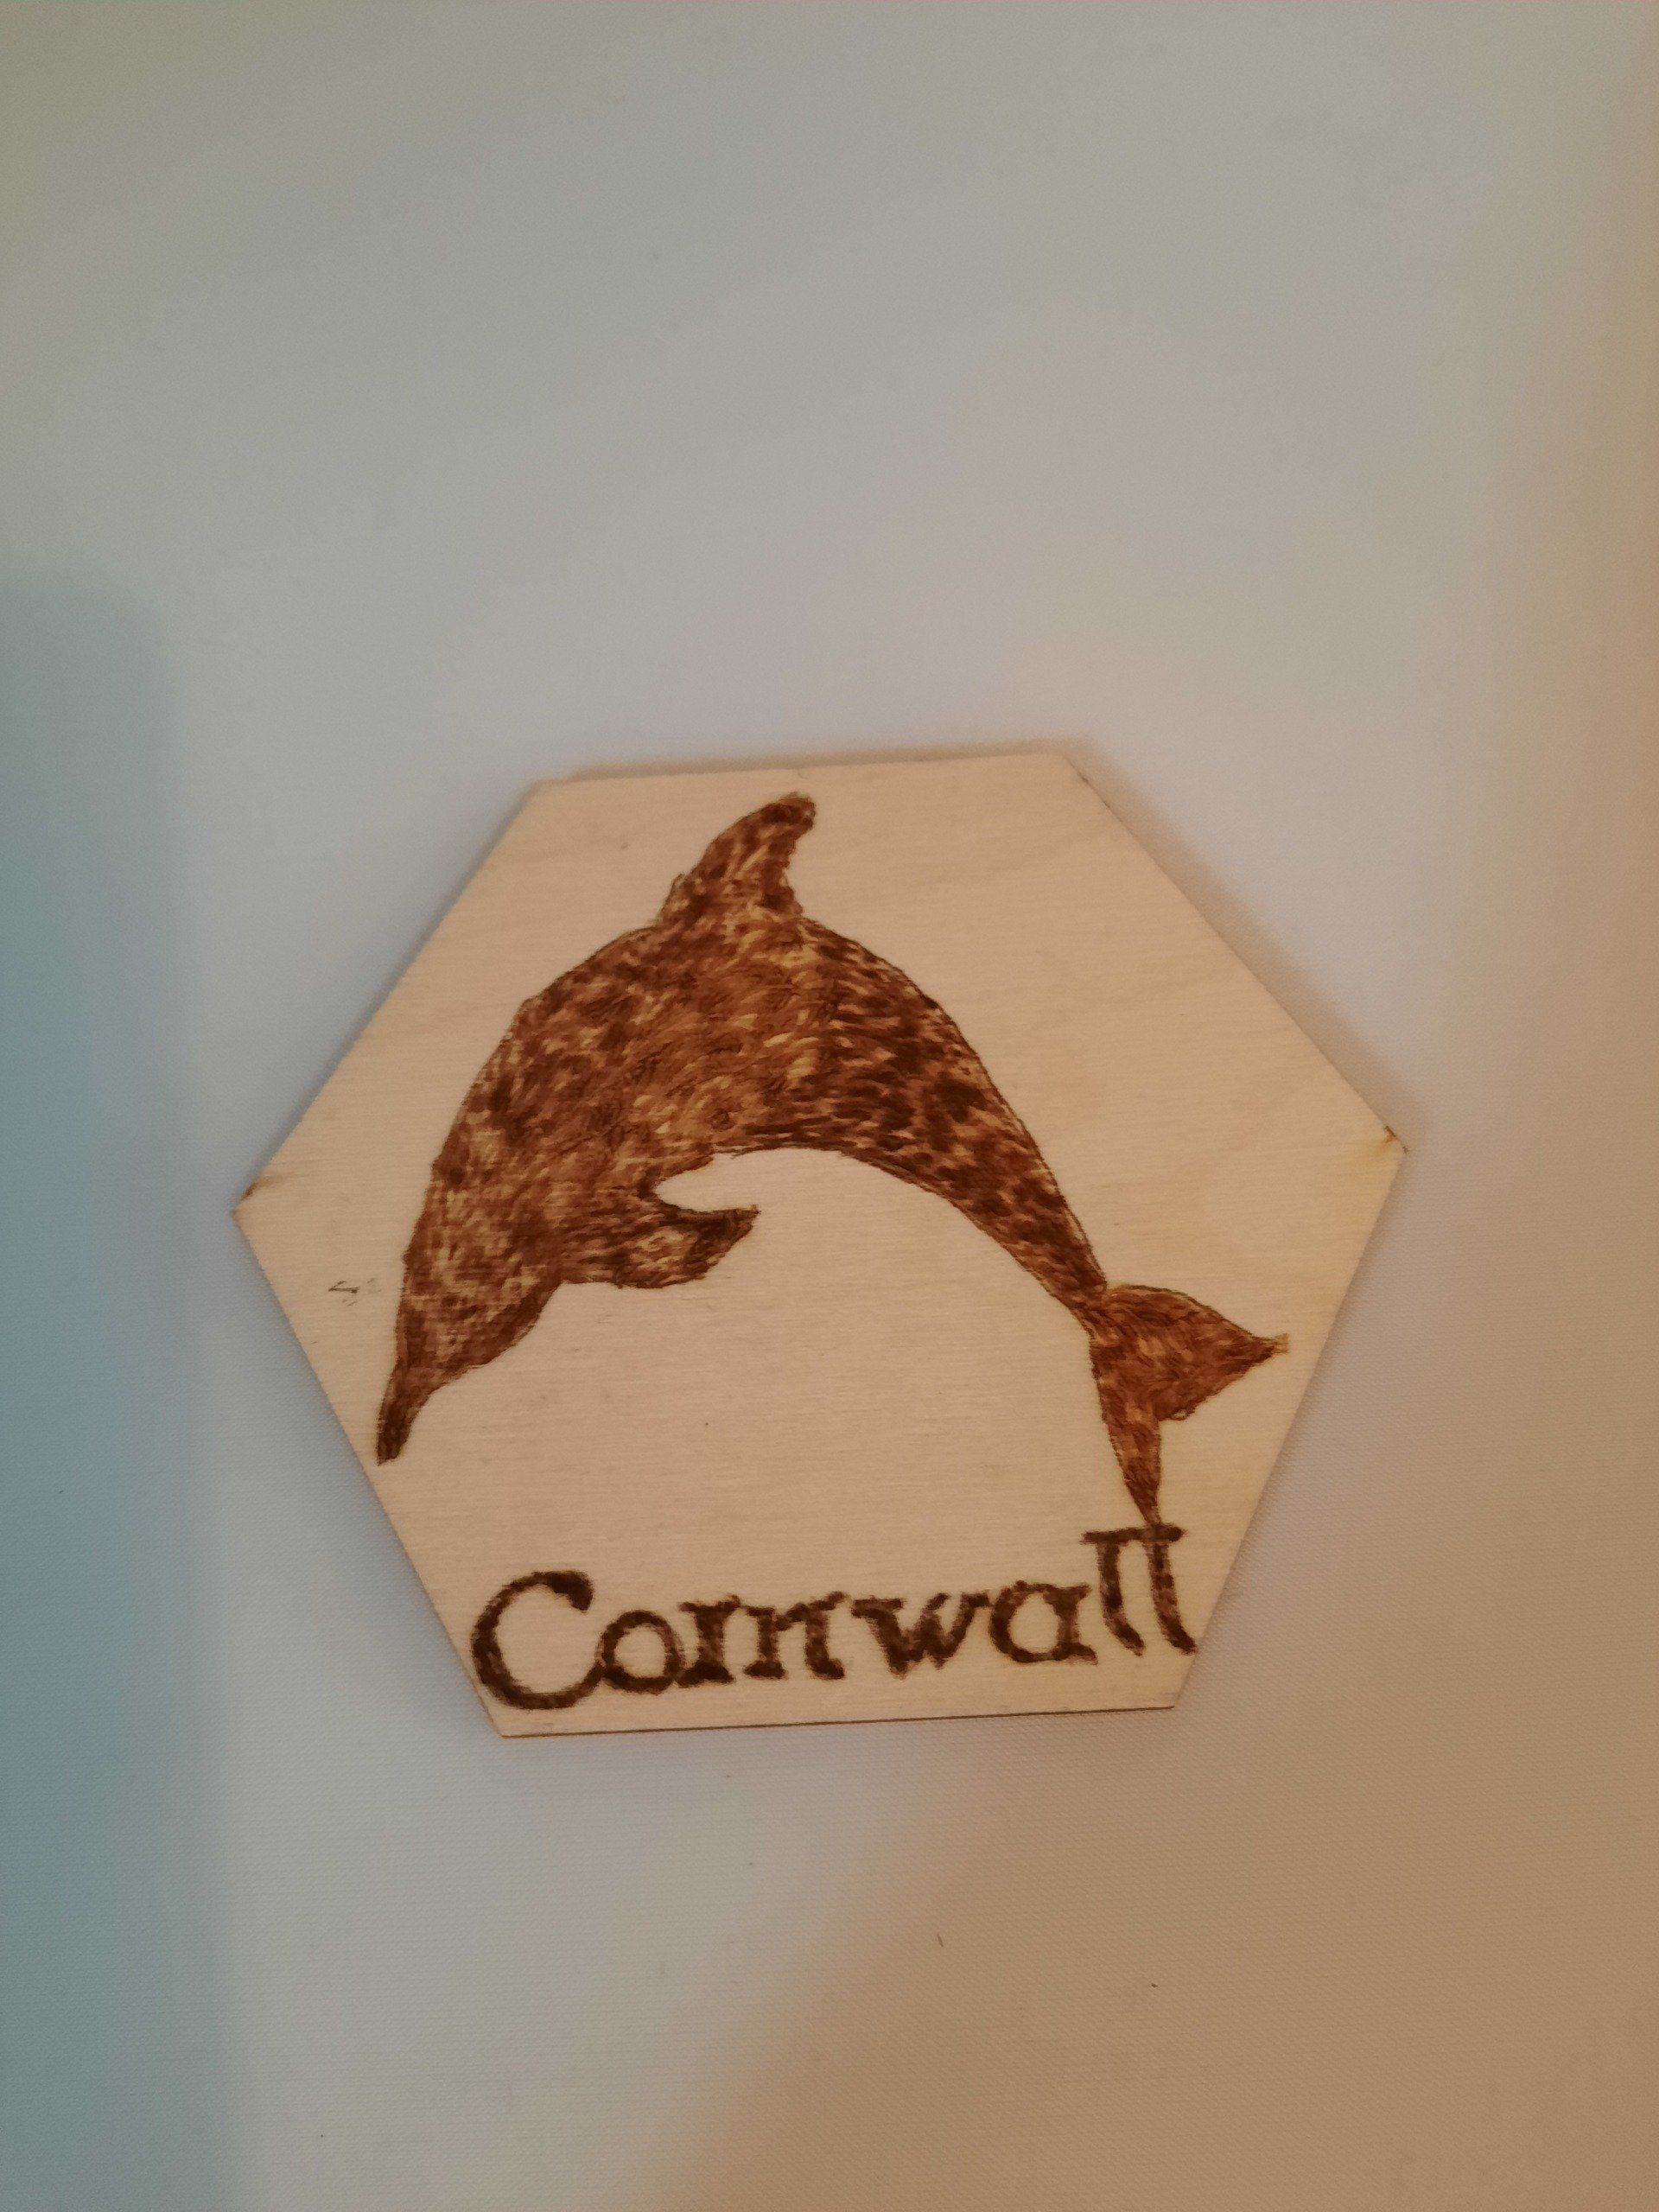 A gift from Cornwall - Magnet for the home - Dolphin